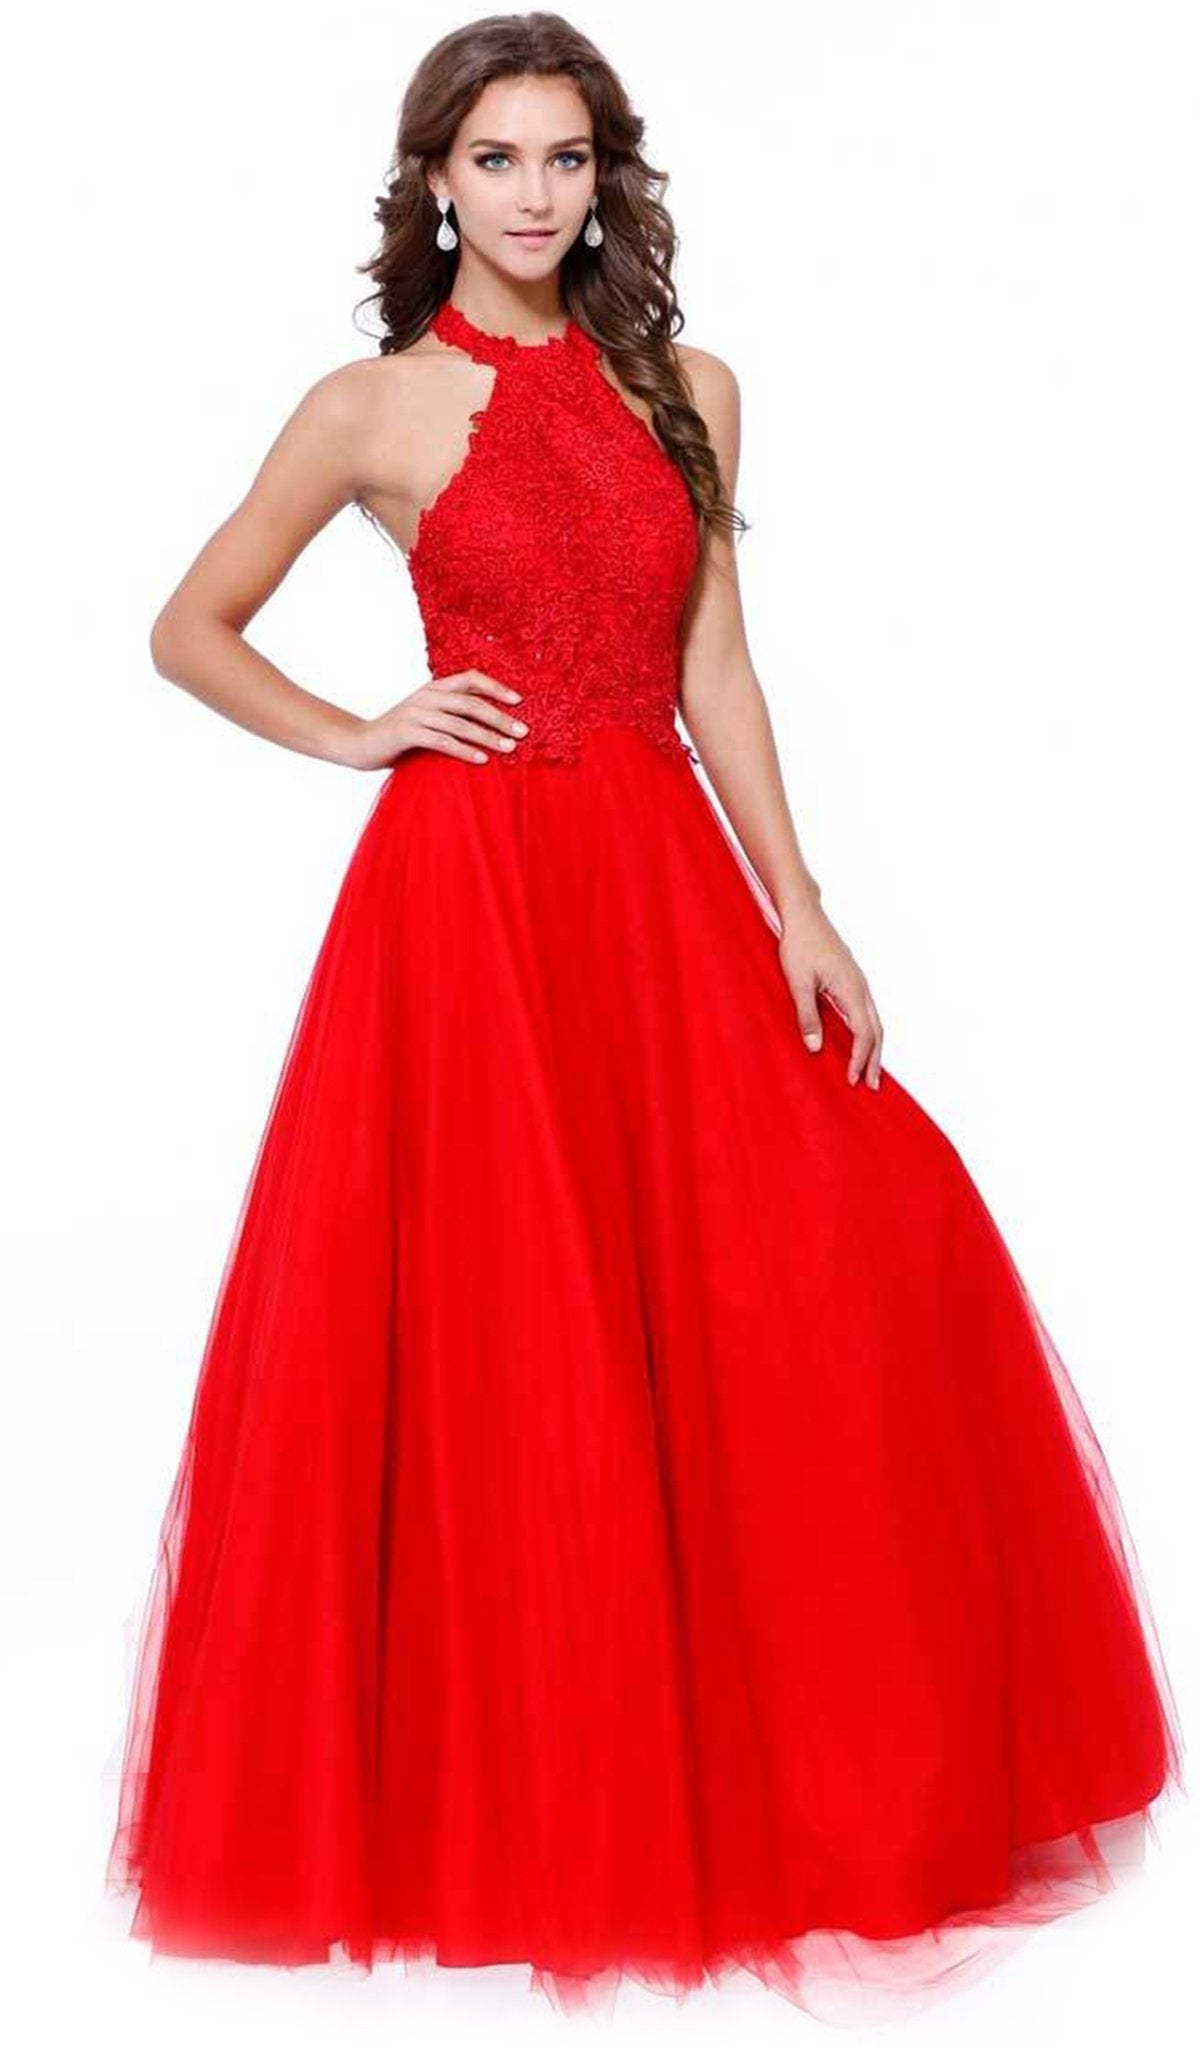 Nox Anabel - 8181 Lace Embroidered Bodice Halter Long Gown Special Occasion Dress XS / Red